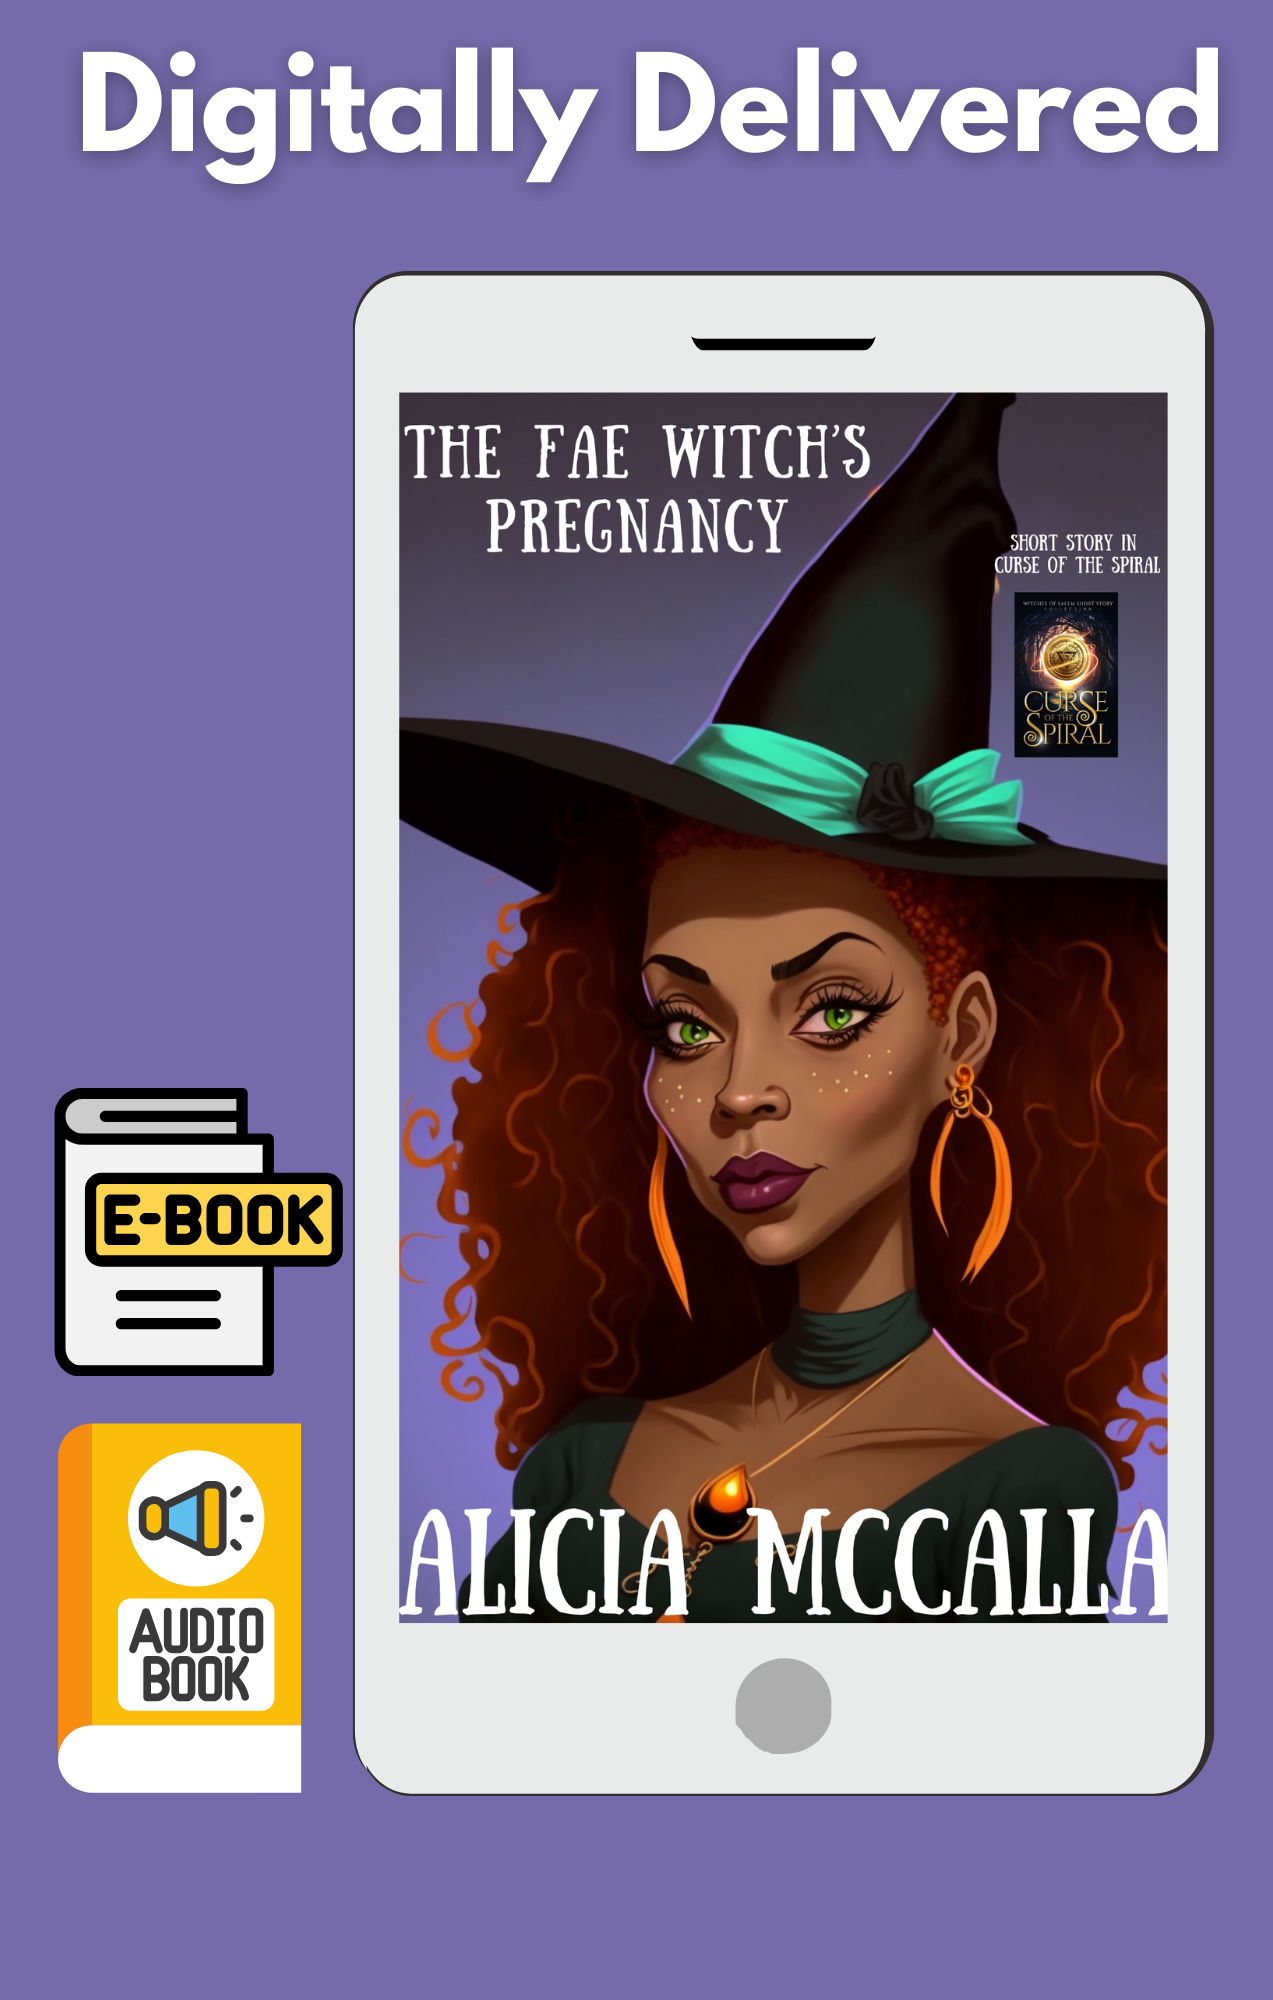 An African American Witch wearing a witch's hat. She has red hair and green eyes. Fae Witch Pregnancy.